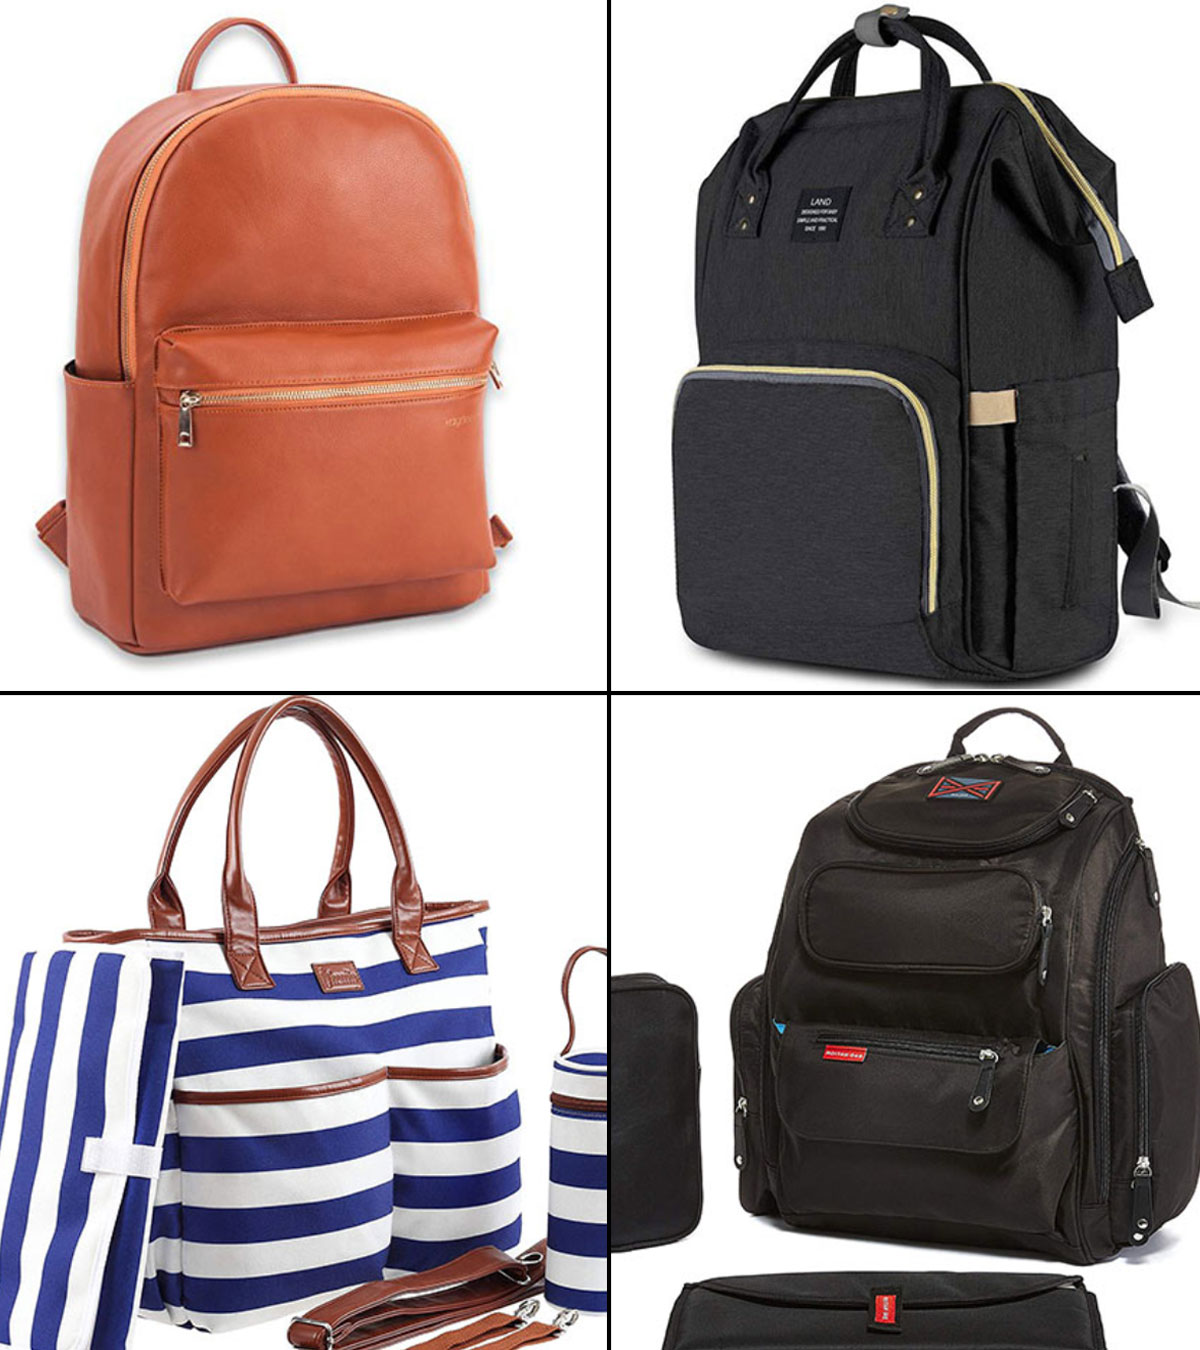 15 Best Diaper Bags To Organize Baby Essentials In 2023